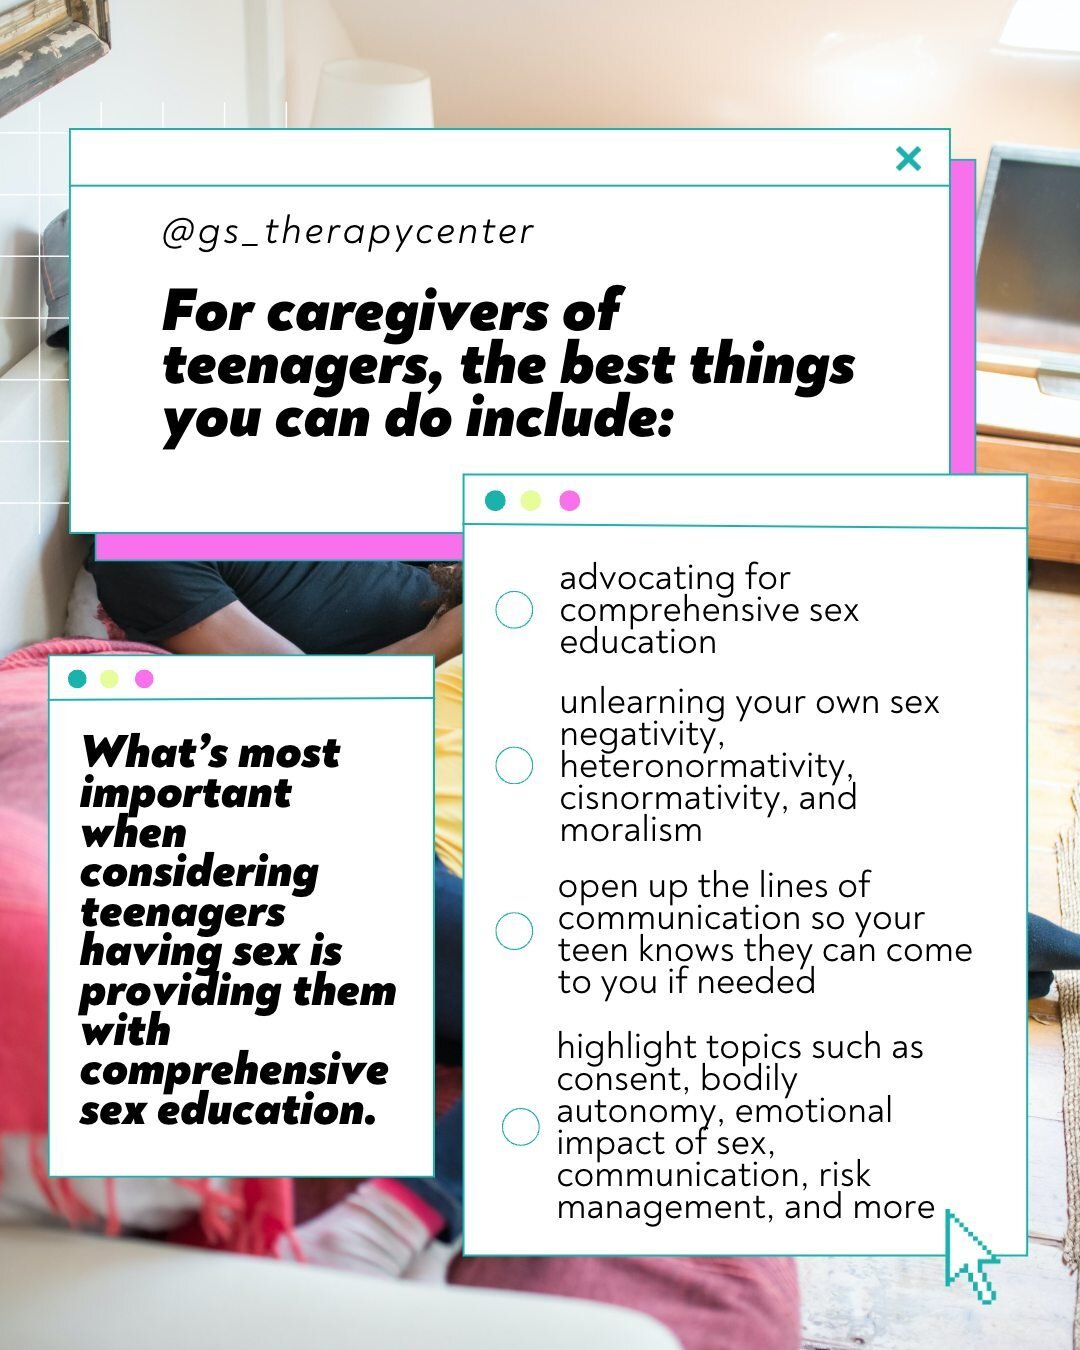 If you don&rsquo;t feel prepared to have those conversations as a caregiver, you can consult with s3x educators and s3x therapists who can help you unlearn what you don&rsquo;t want to pass down, create age appropriate scripts for communicating with 